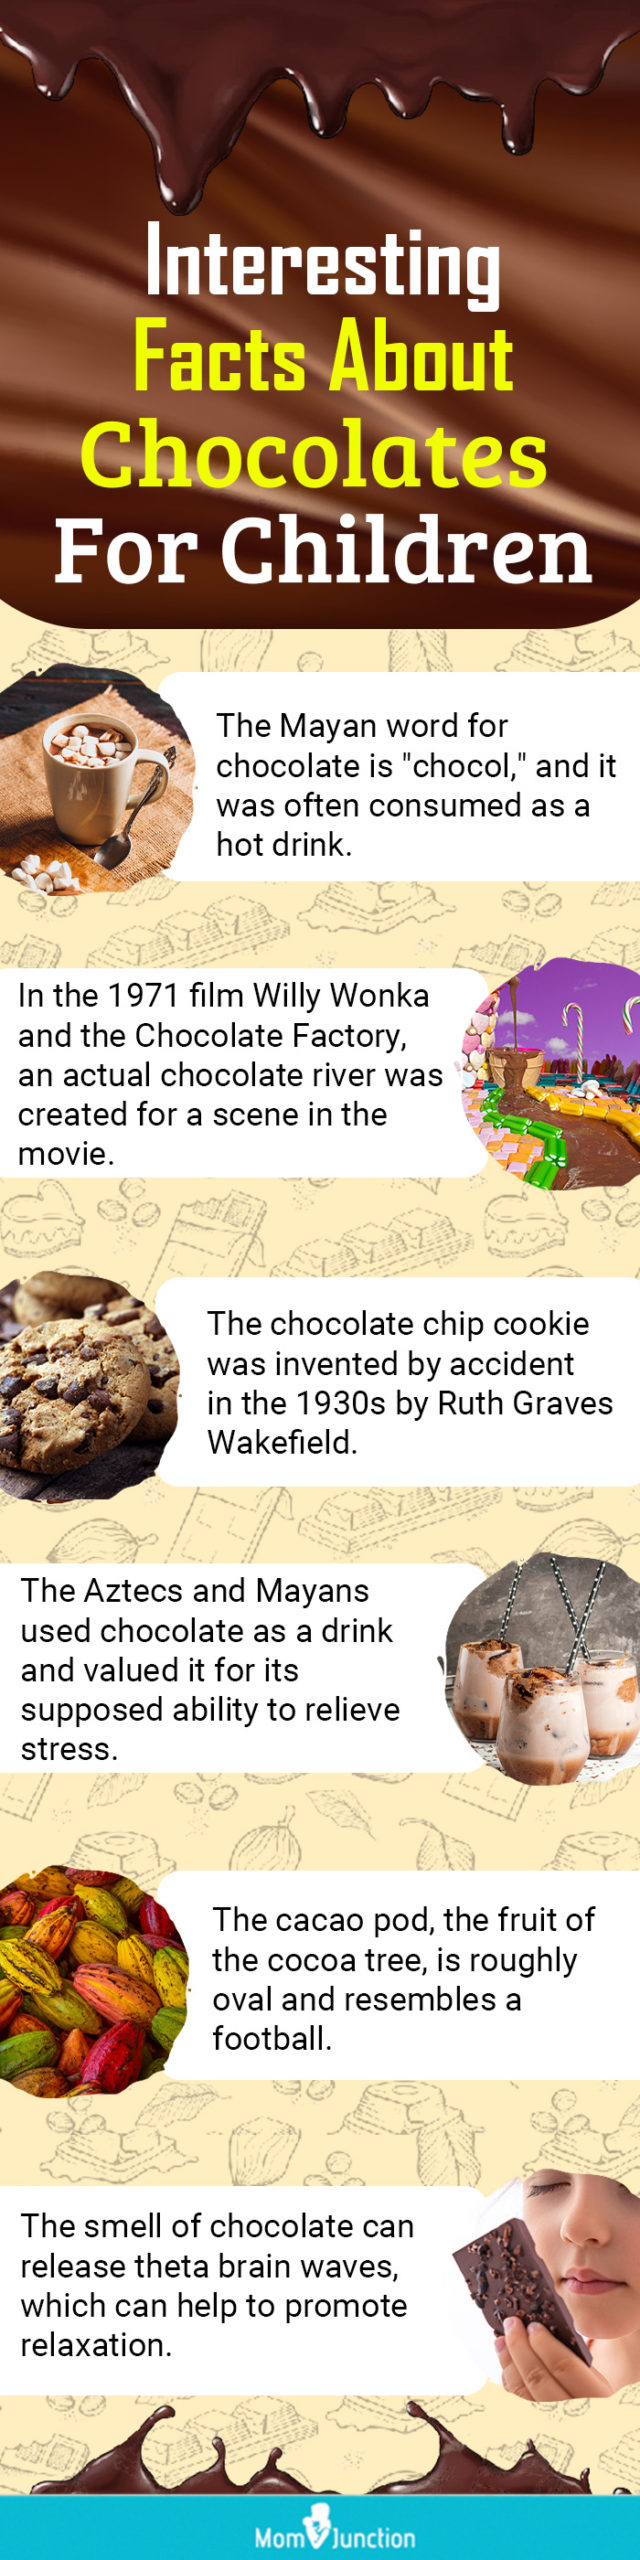 interesting facts about chocolates for children [infographic]